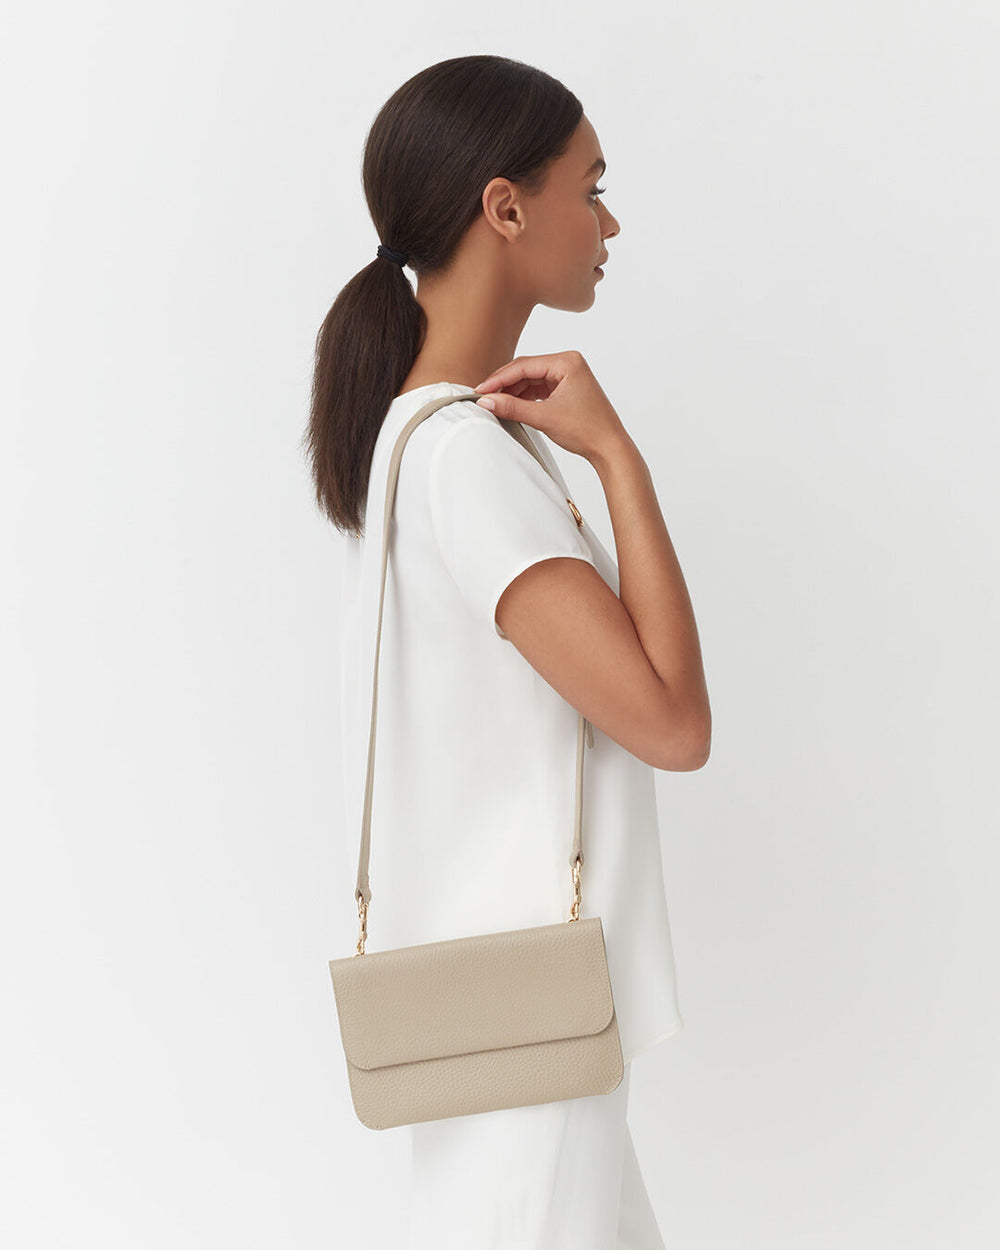 Woman standing sideways with a shoulder bag, looking to the side.